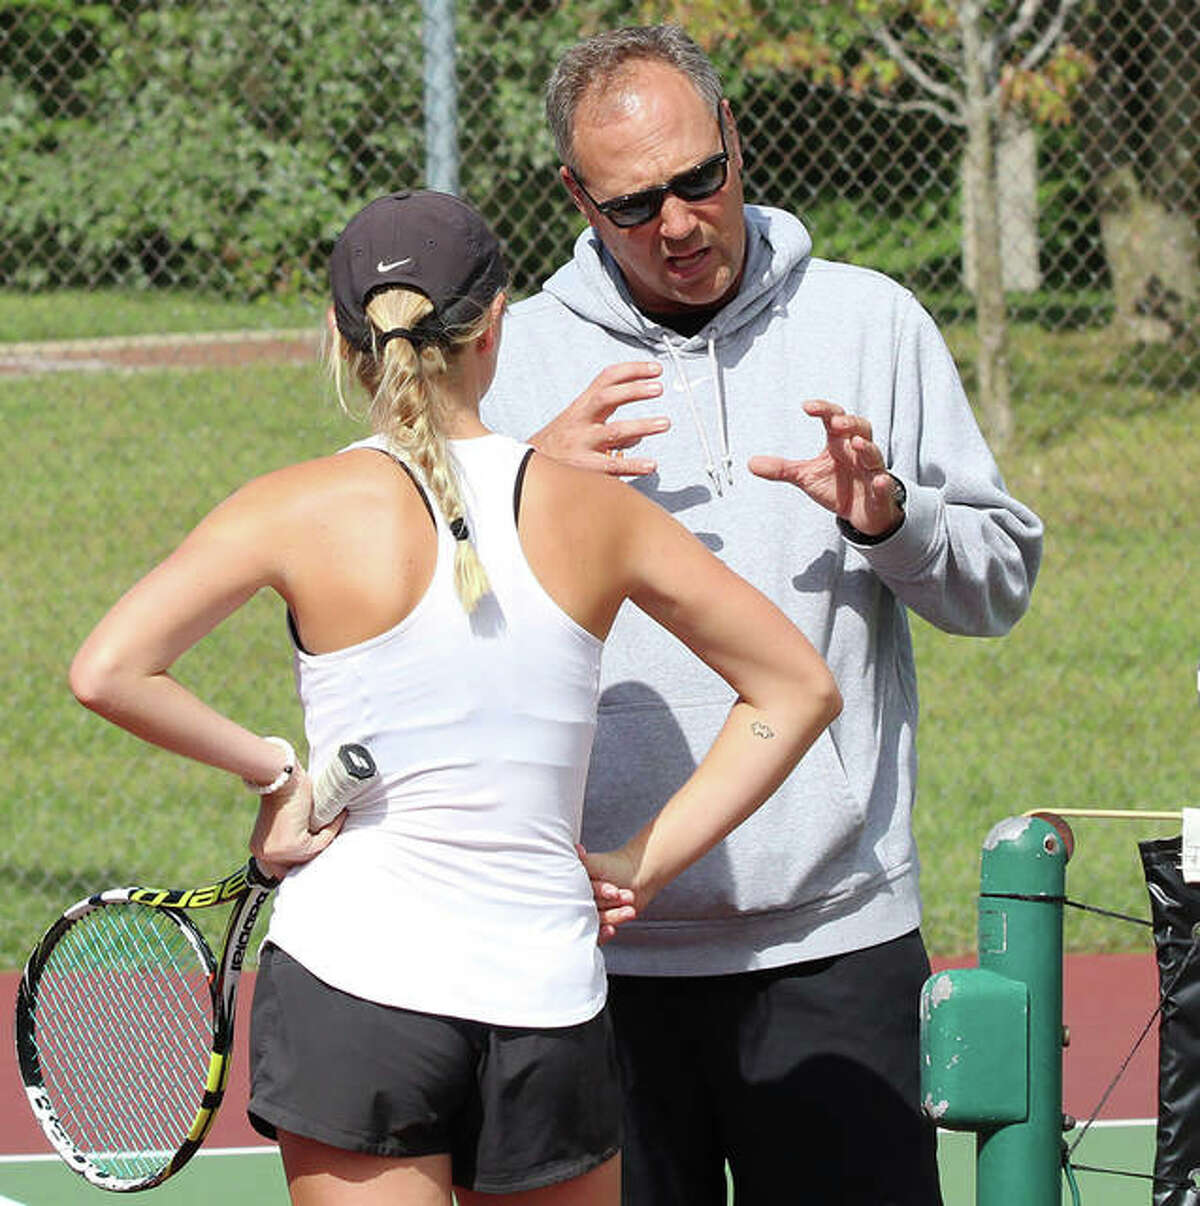 Edwardsville High School tennis coach Dave Lipe (right), shown talking with Annie McGinnis during a break in a doubles match.